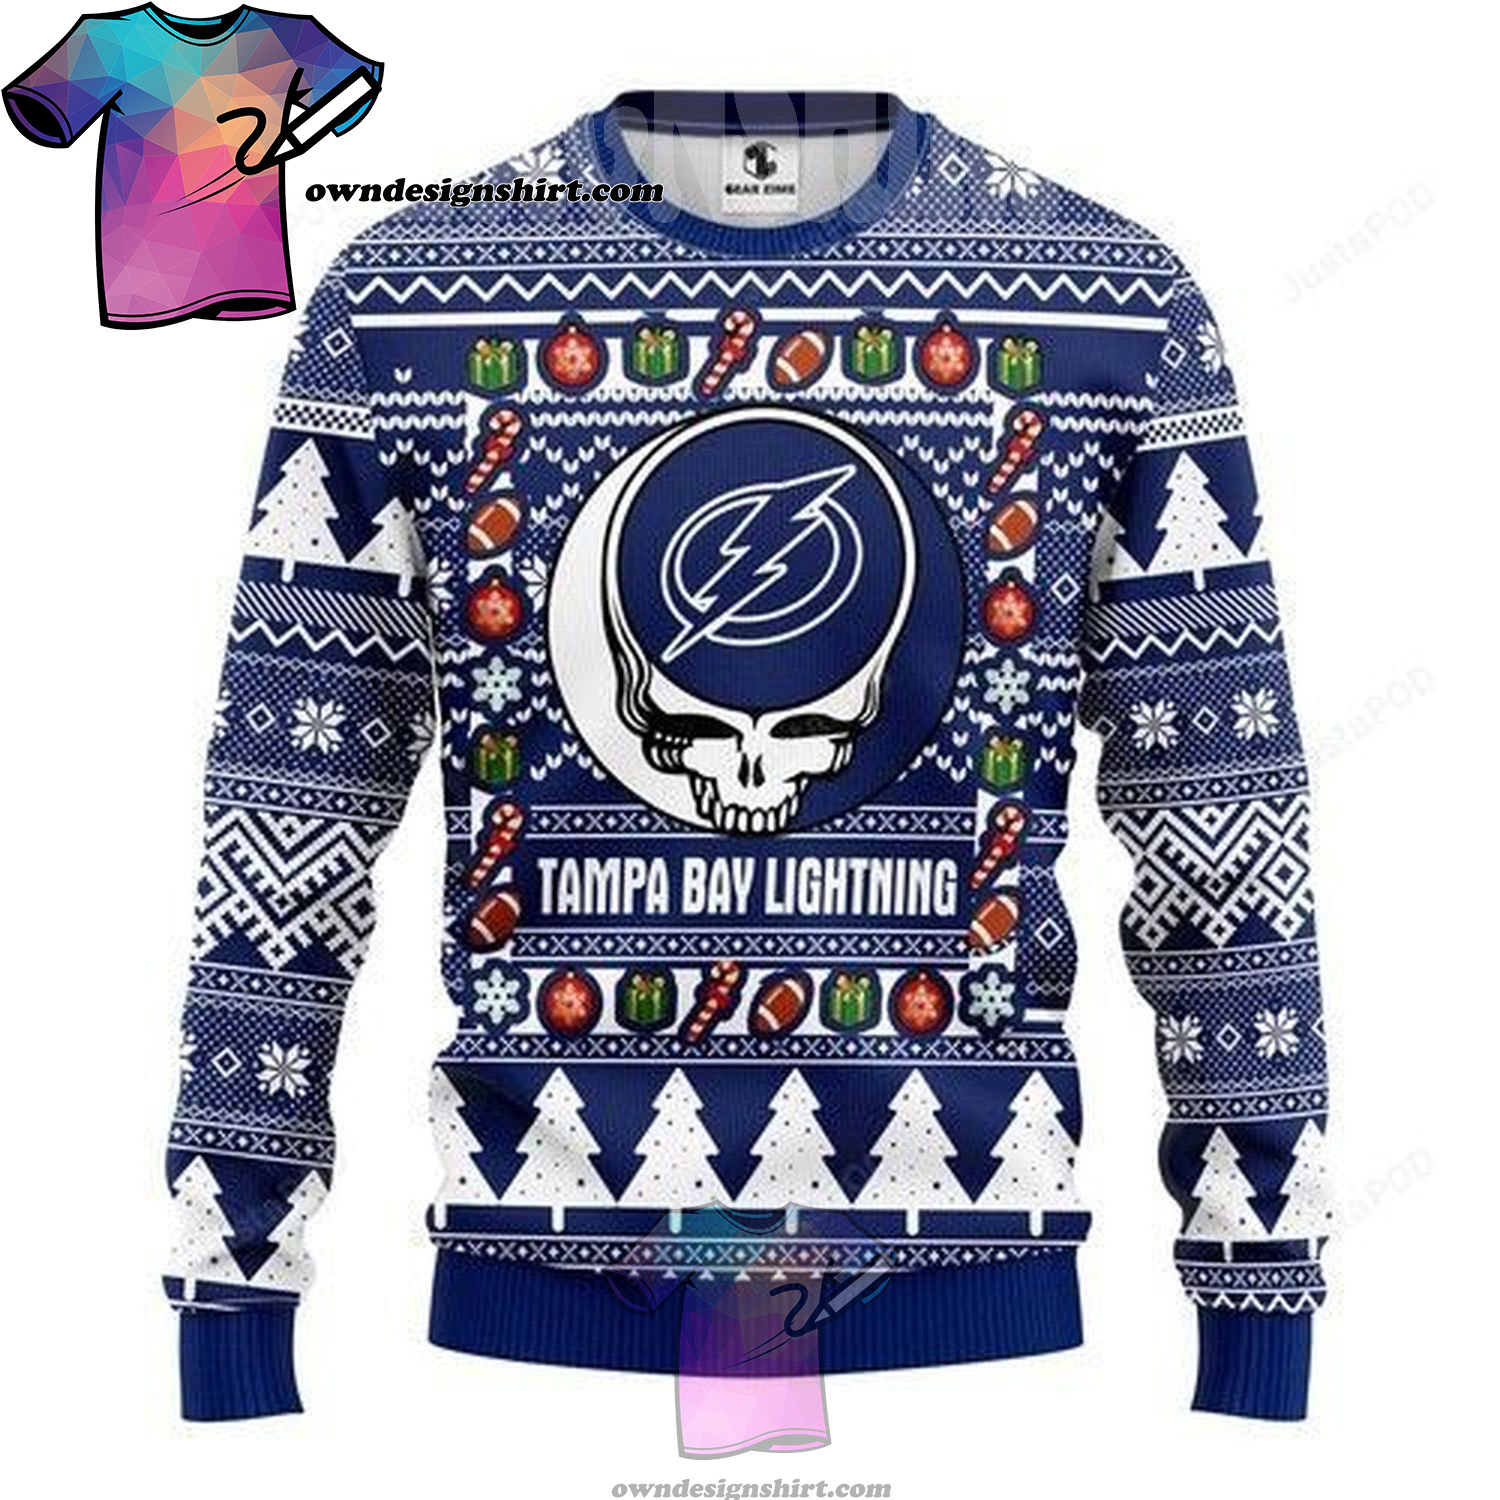 Lightning Christmas Sweater Amazing Tampa Bay Lightning Gift Ideas -  Personalized Gifts: Family, Sports, Occasions, Trending